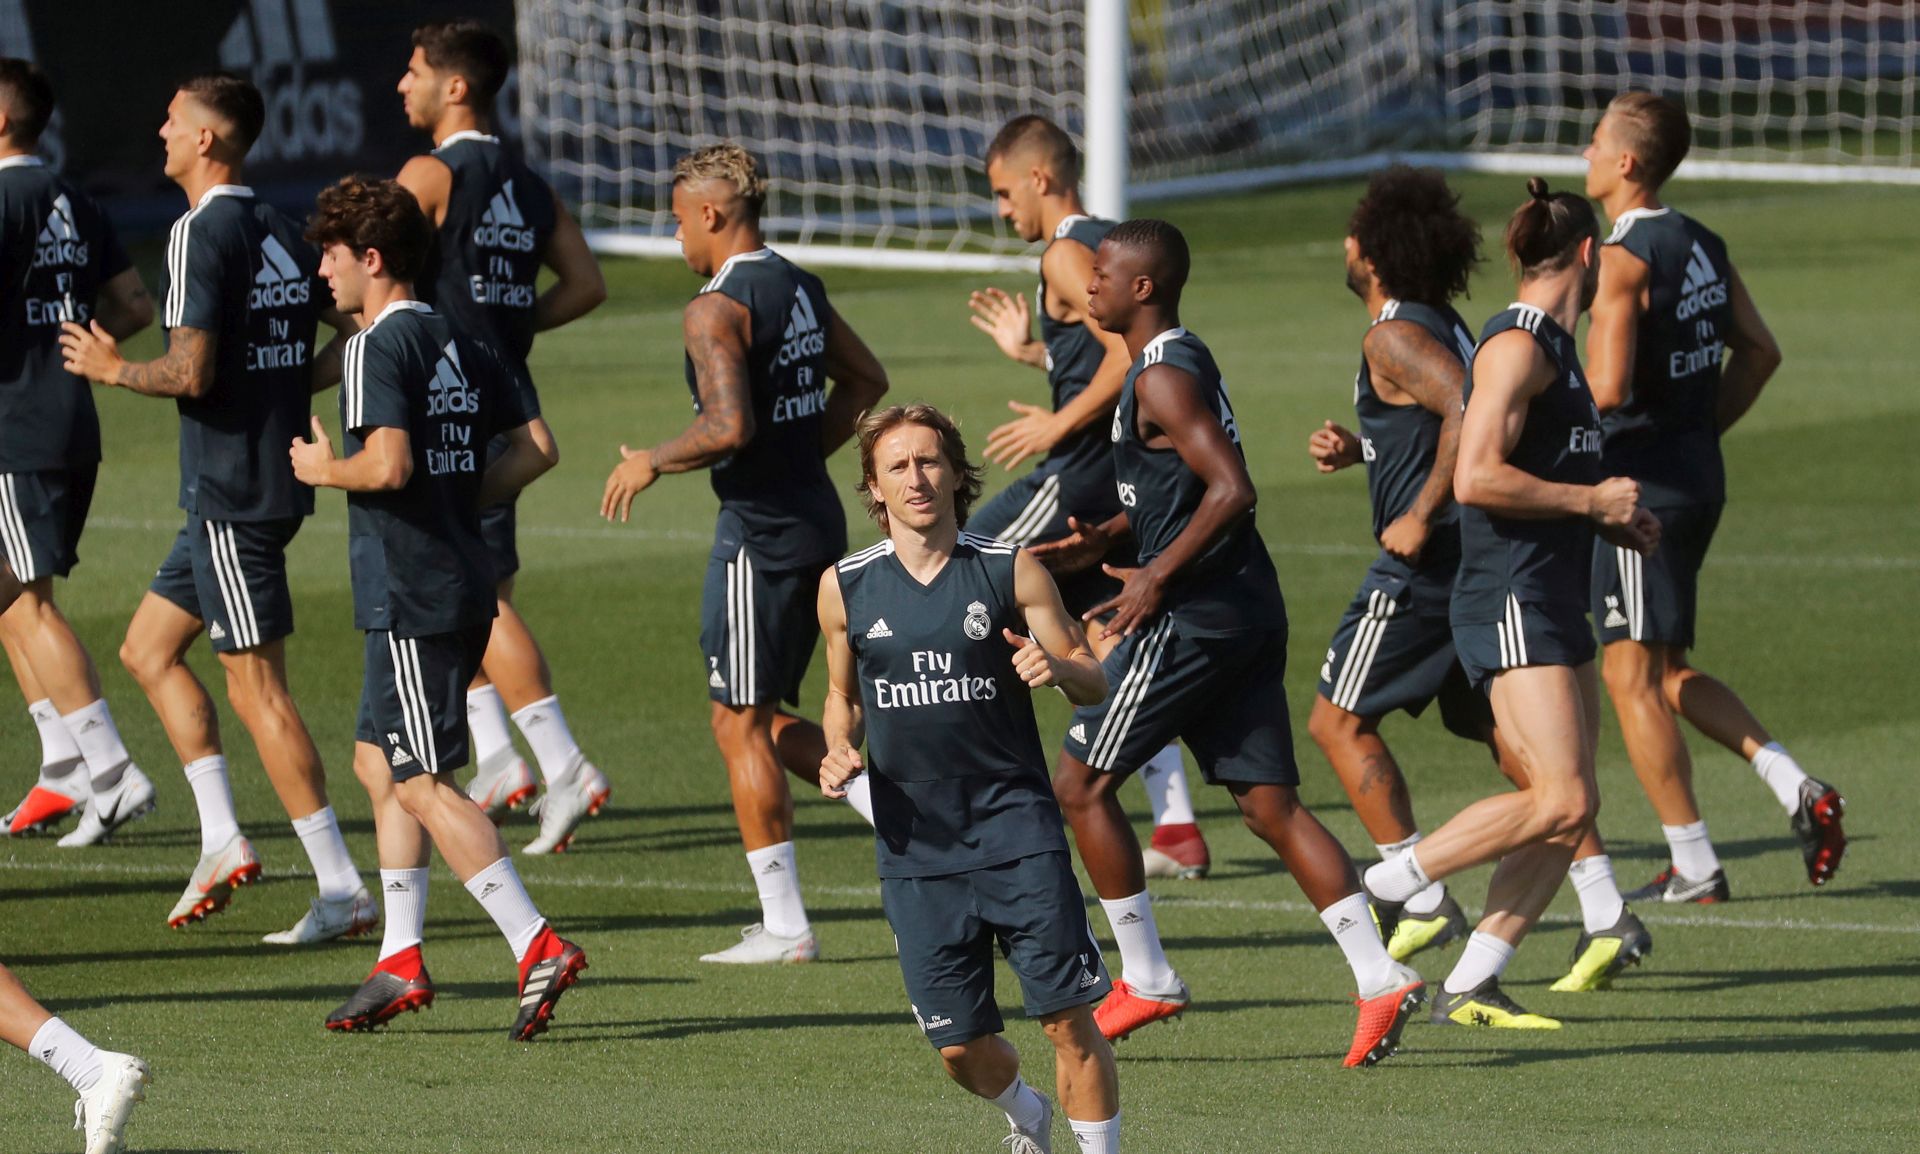 epa07019251 Real Madrid's Croatian midfielder Luka Modric (C), attends a training session at Valdebebas sports complex in Madrid, Spain, 14 September 2018. Real Madrid will face Athletic Bilbao in a Spanish Primera Division soccer match the upcoming 15 September.  EPA/Juan Carlos Hidalgo